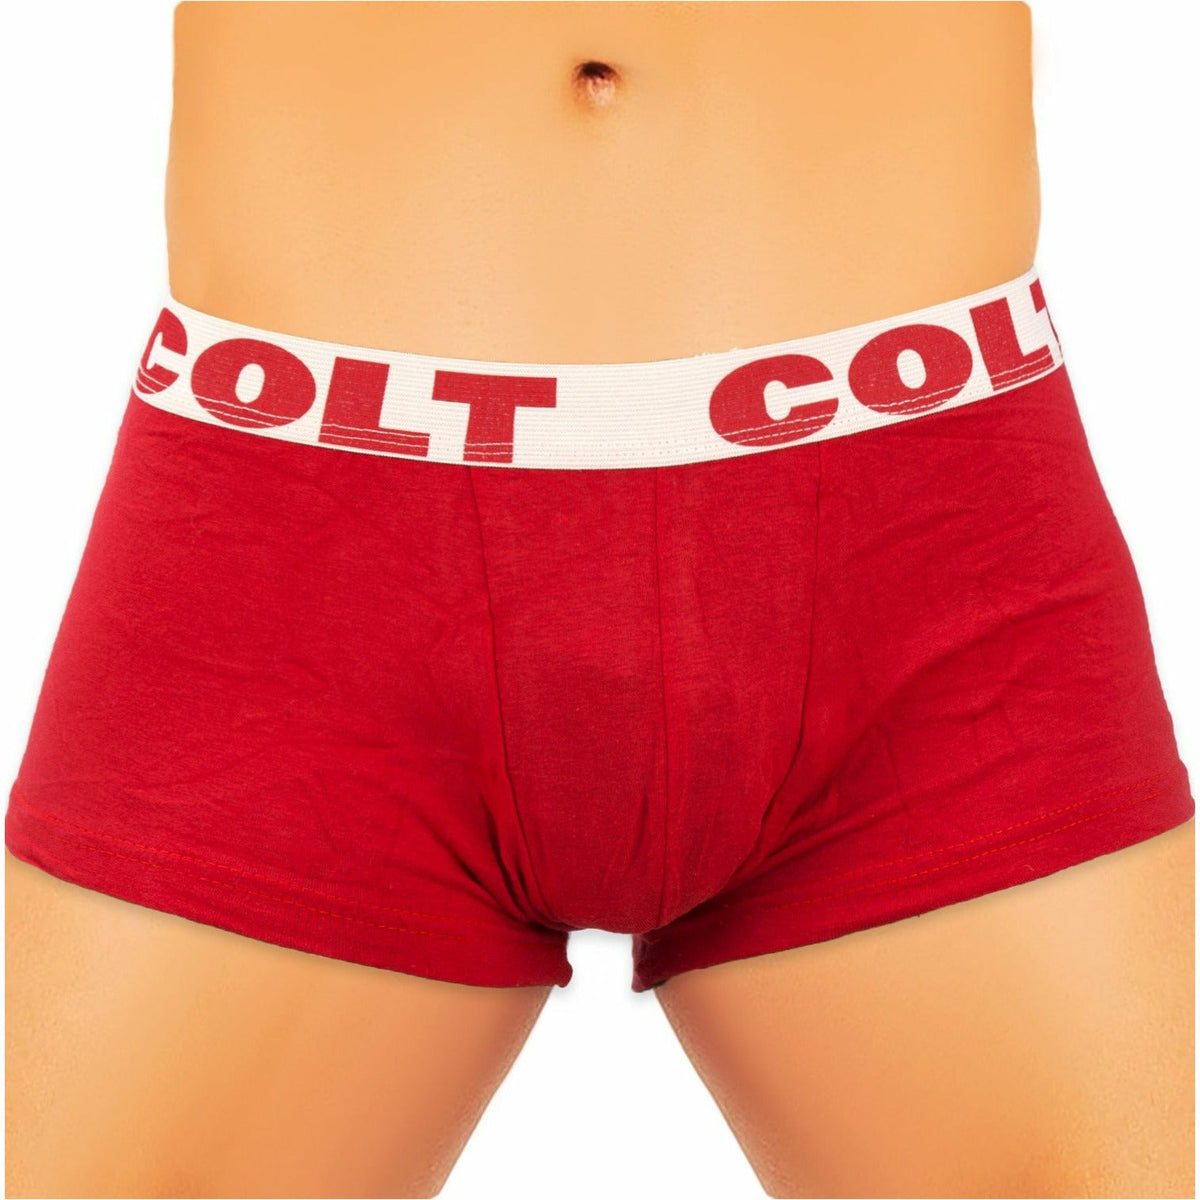 Colt Red Boxer Brief - Red - Small